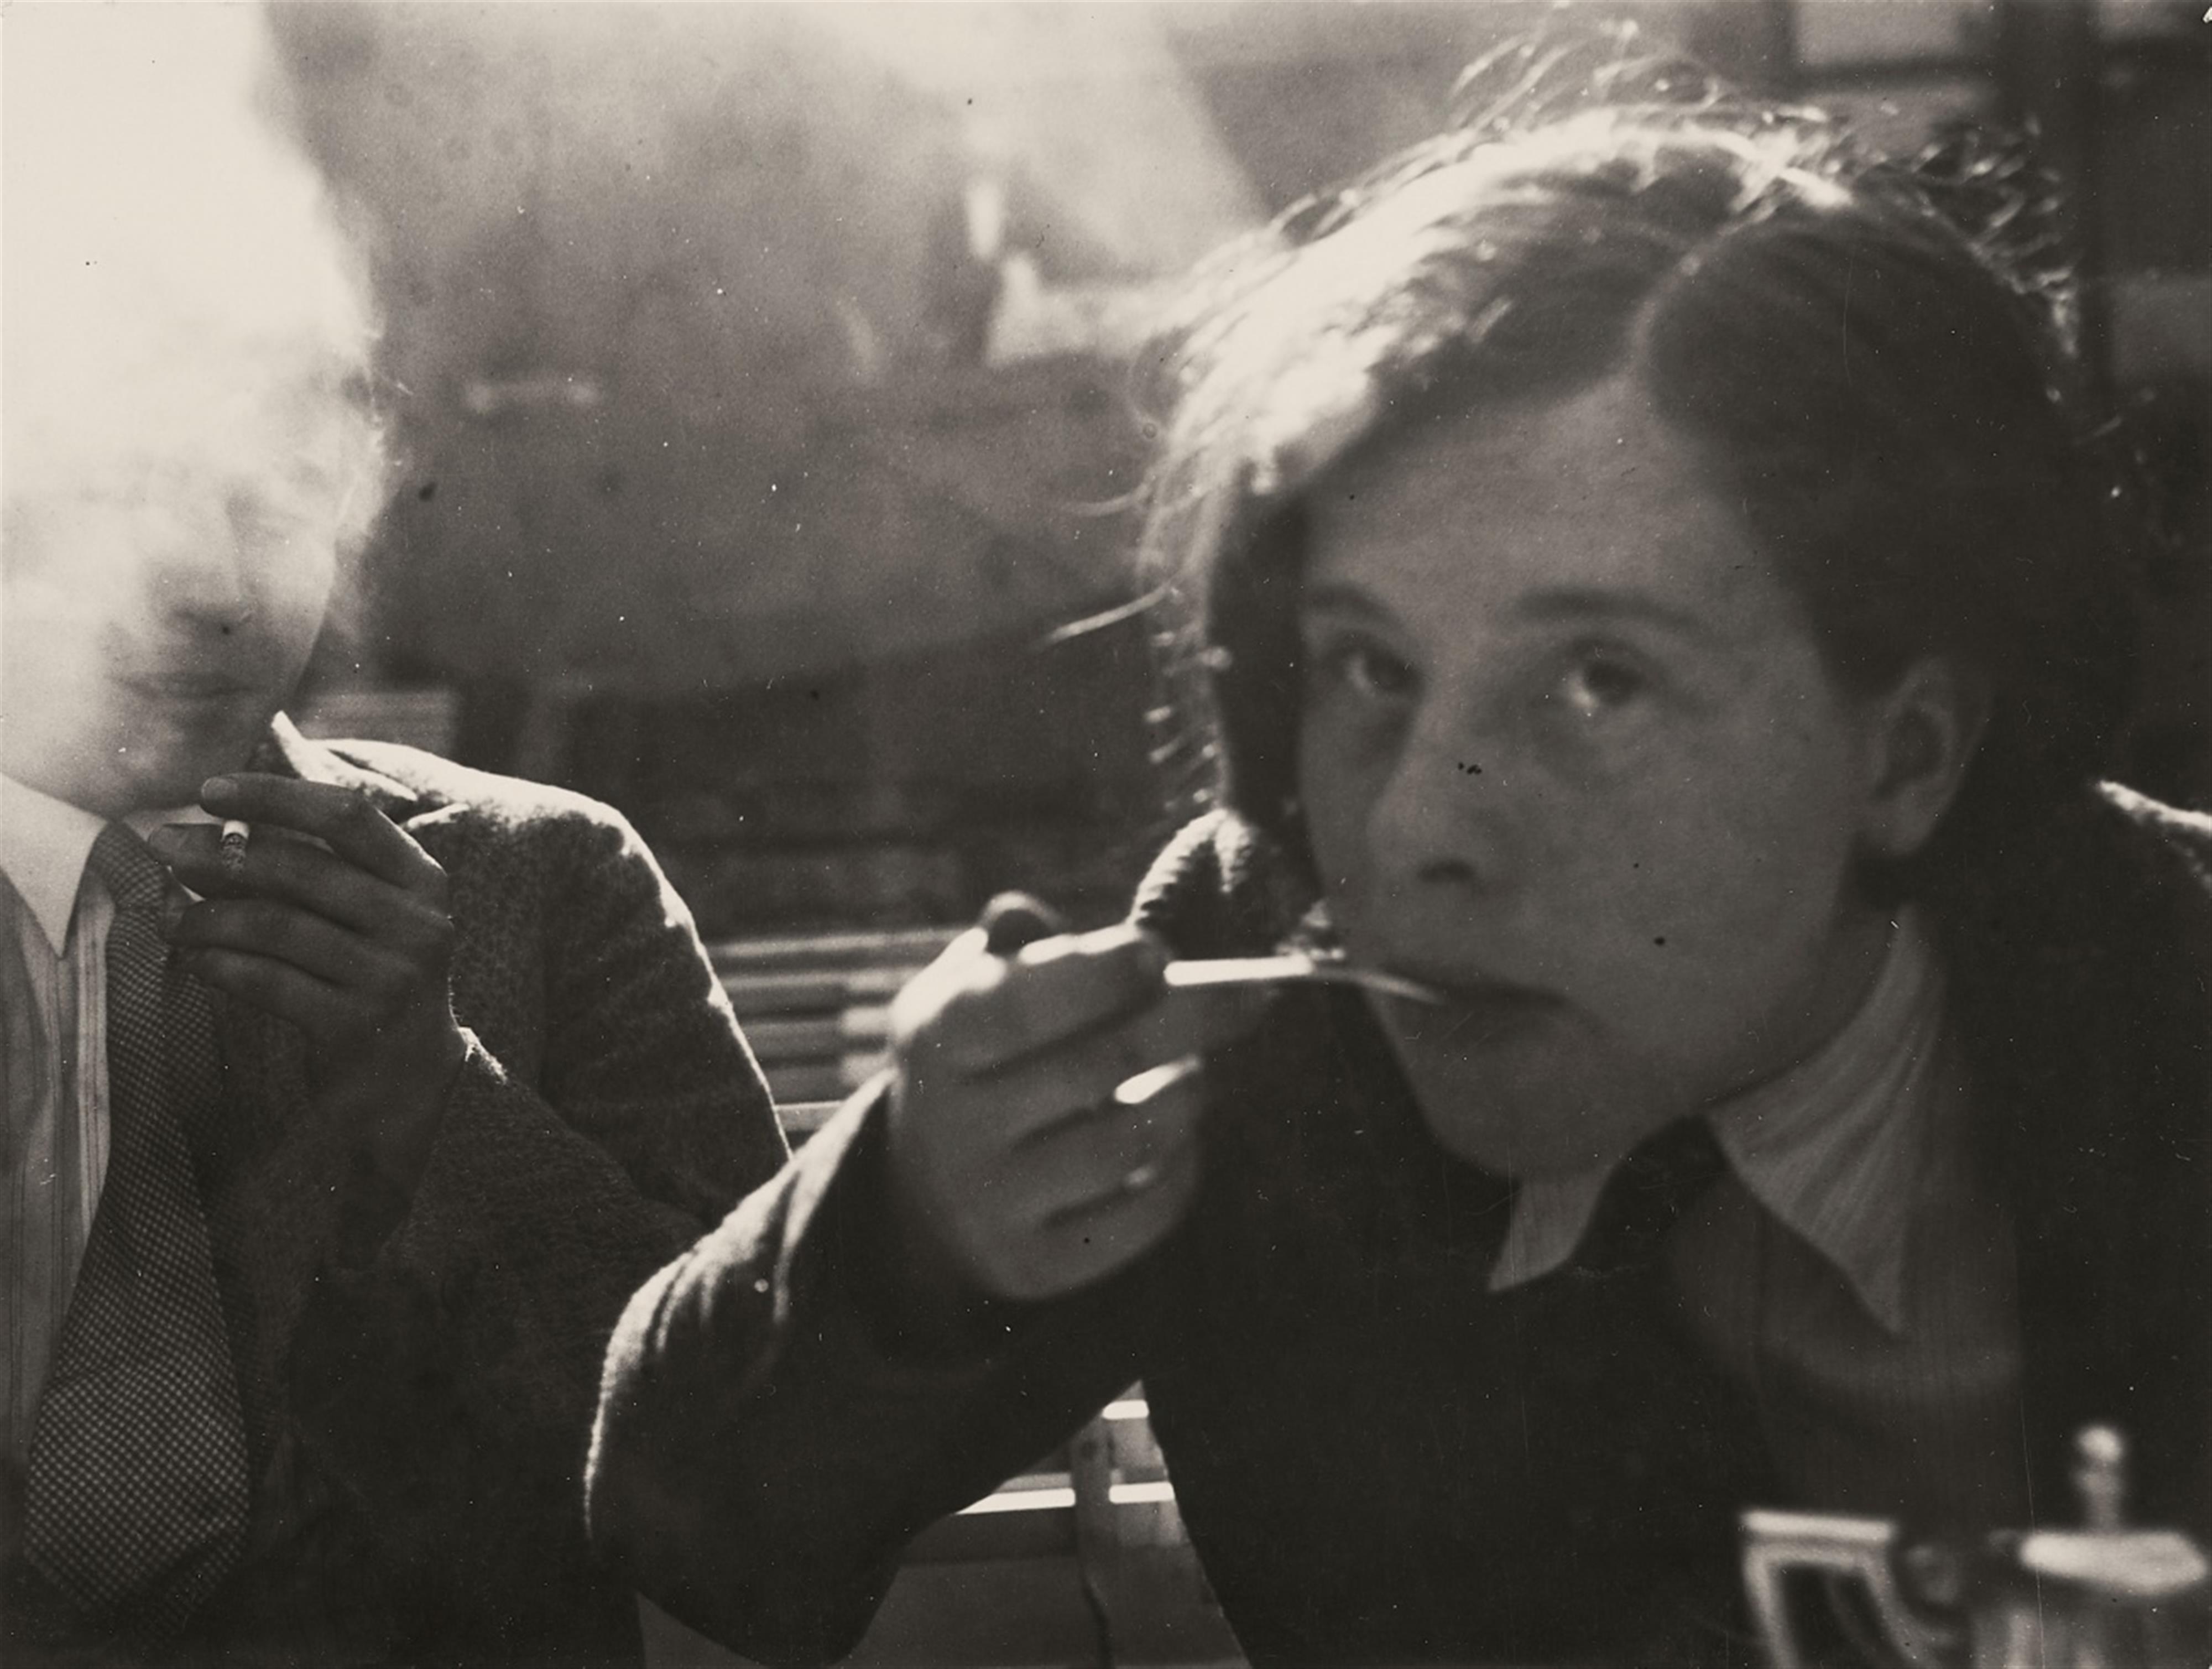 T. Lux Feininger - Untitled (Two students at the Bauhaus canteen) - image-1